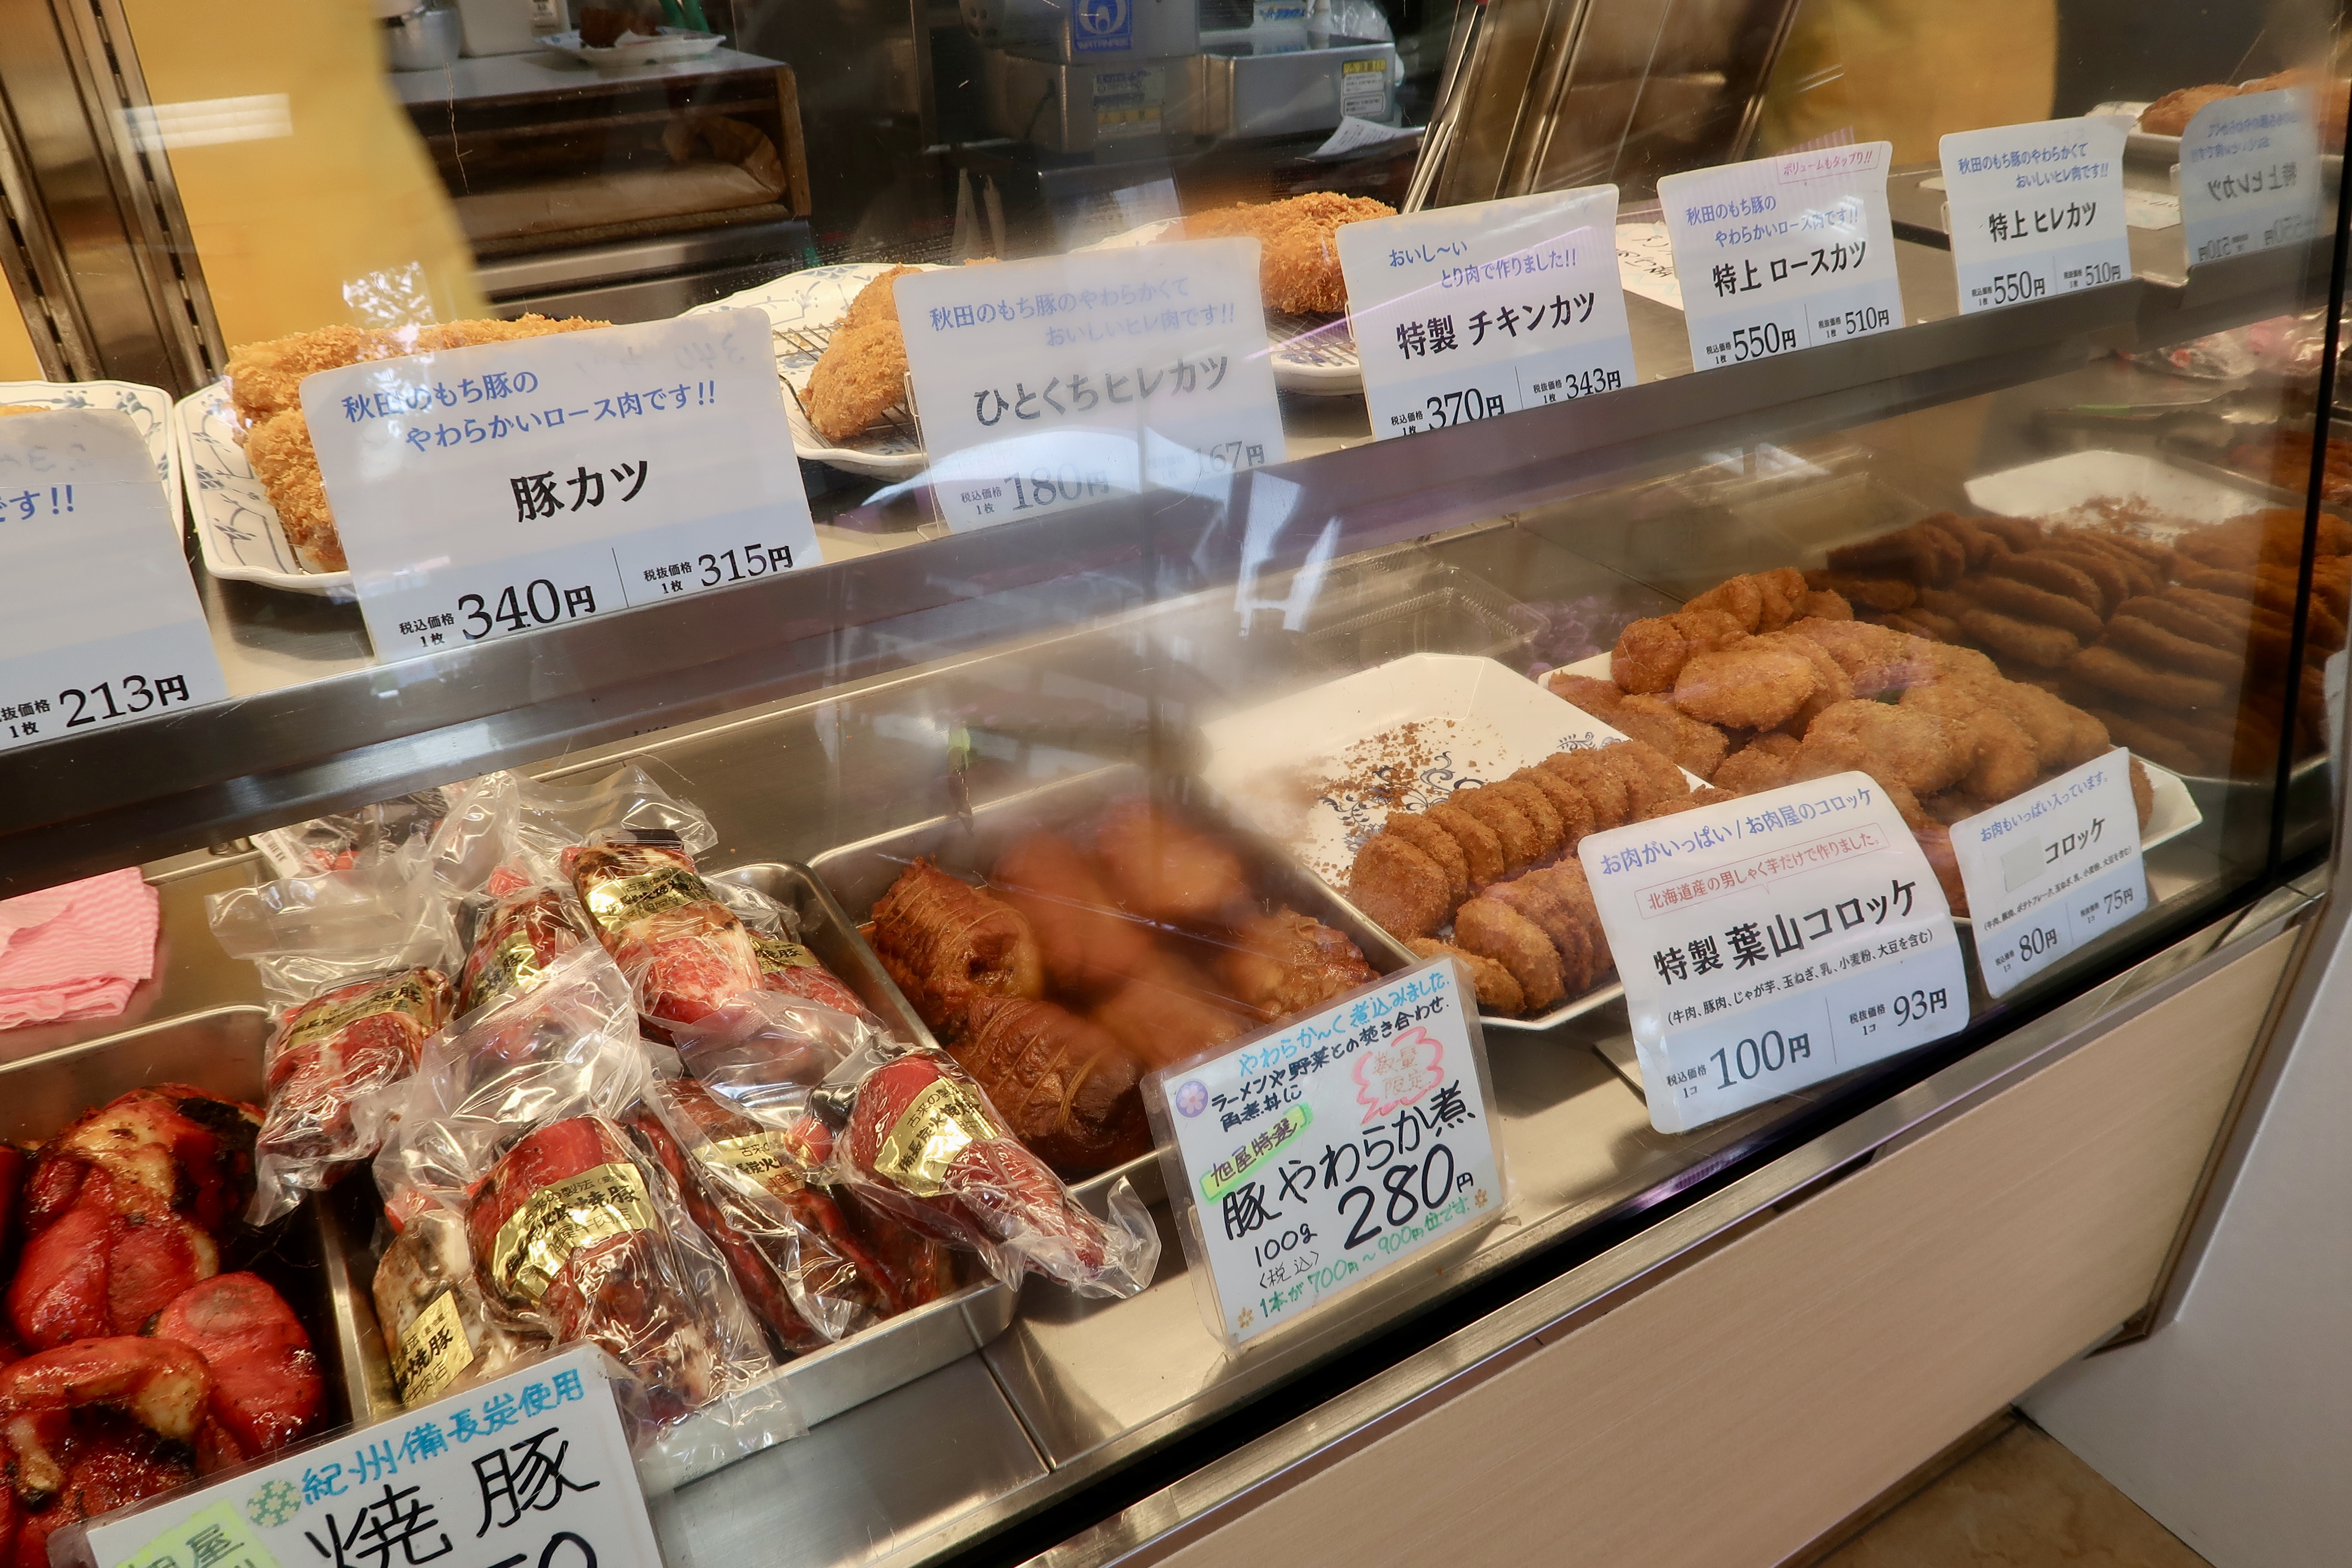 Delicious range of products from Asahiya